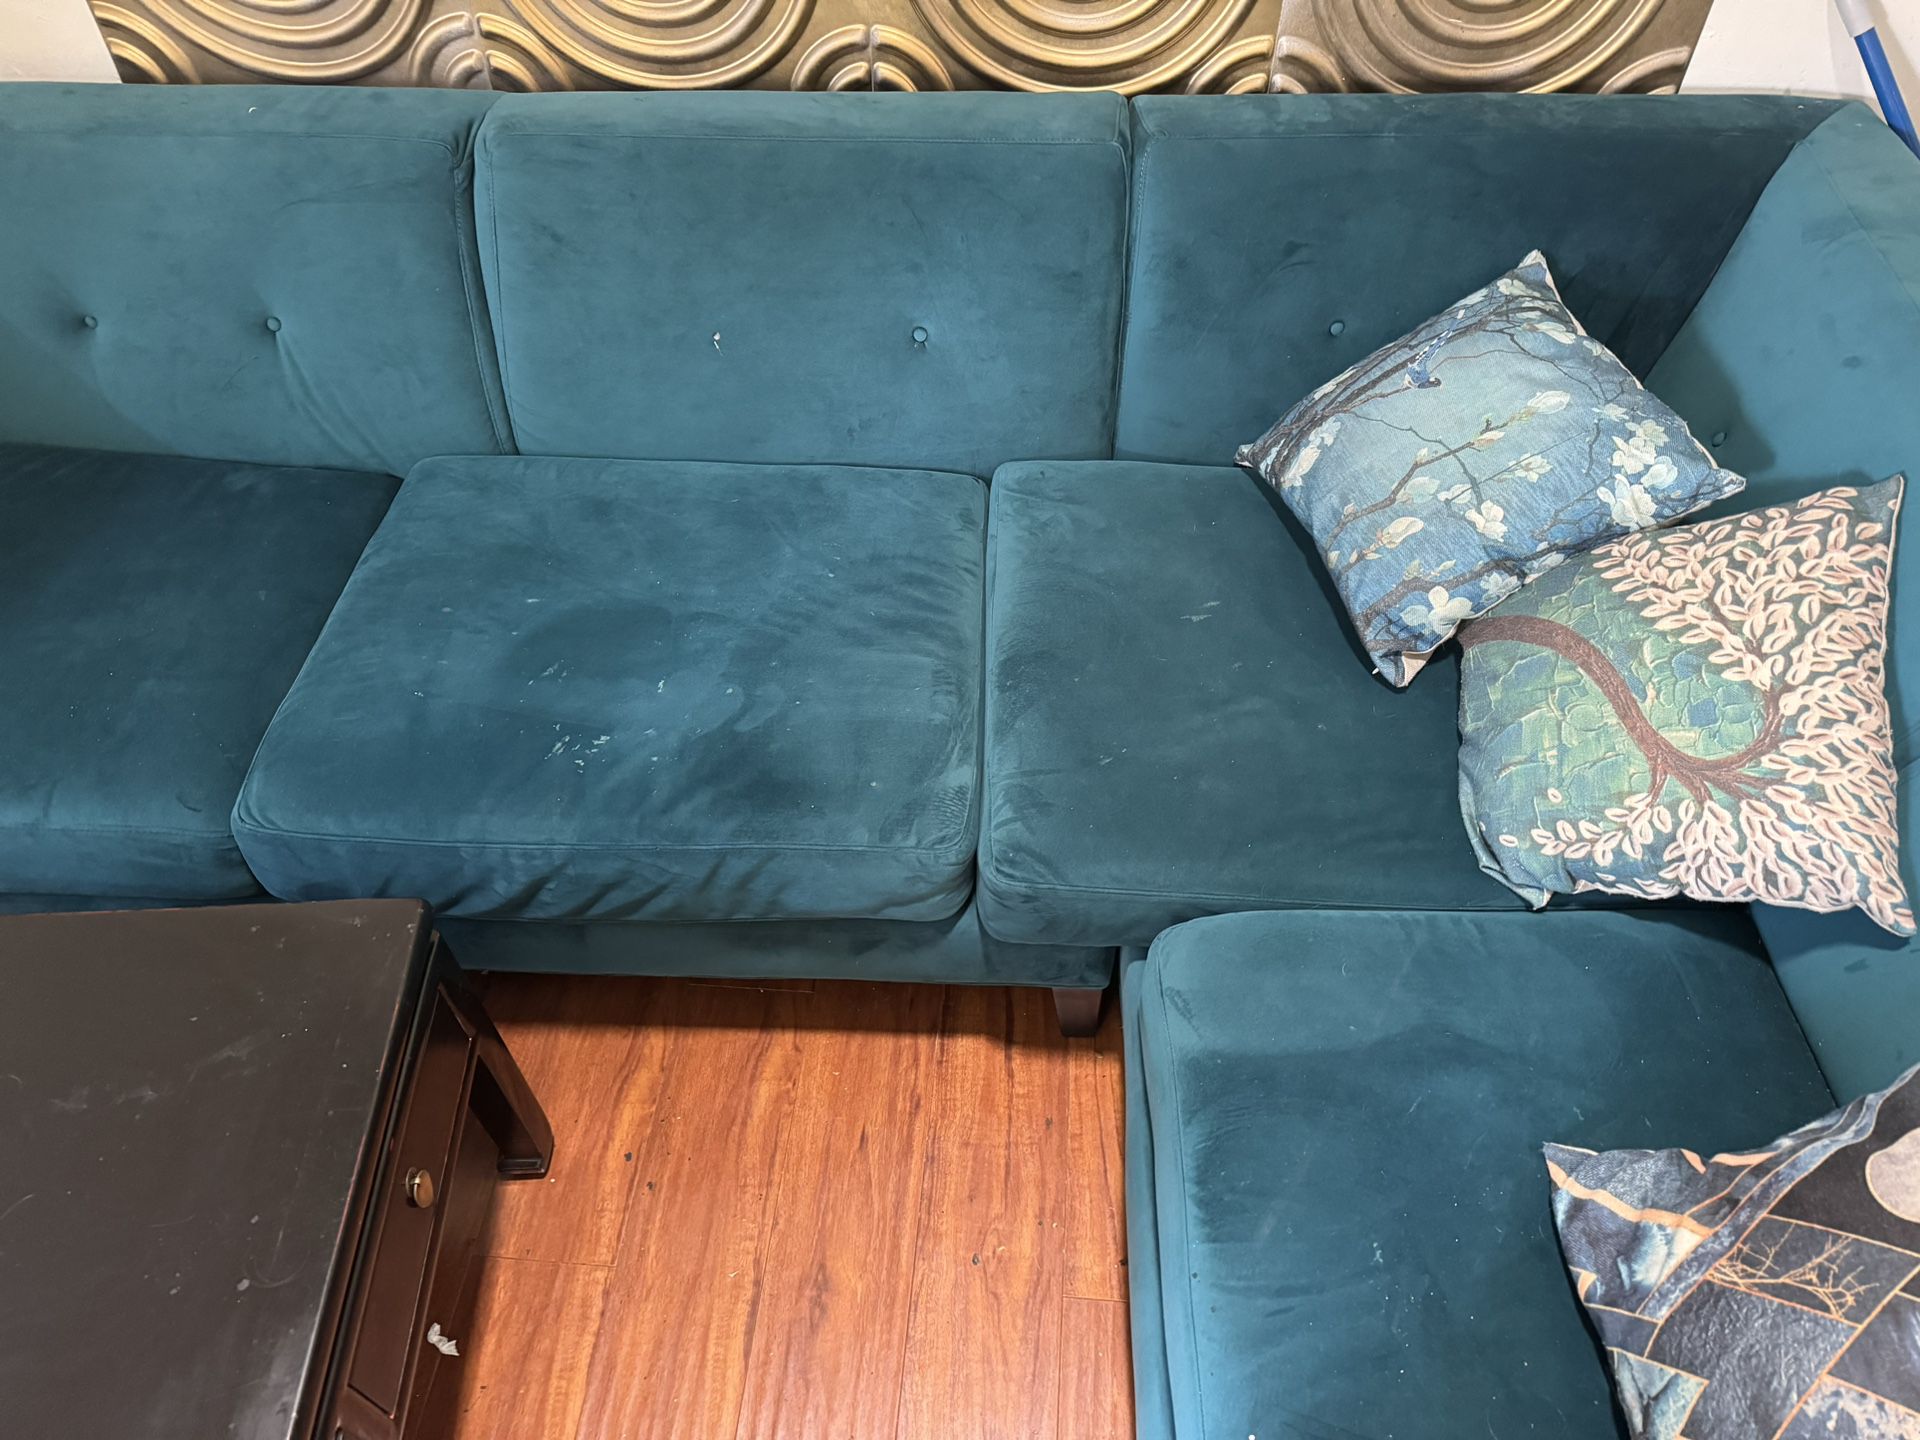 L Shaped Sofa With Upholstery Damage, Almost New Frame 